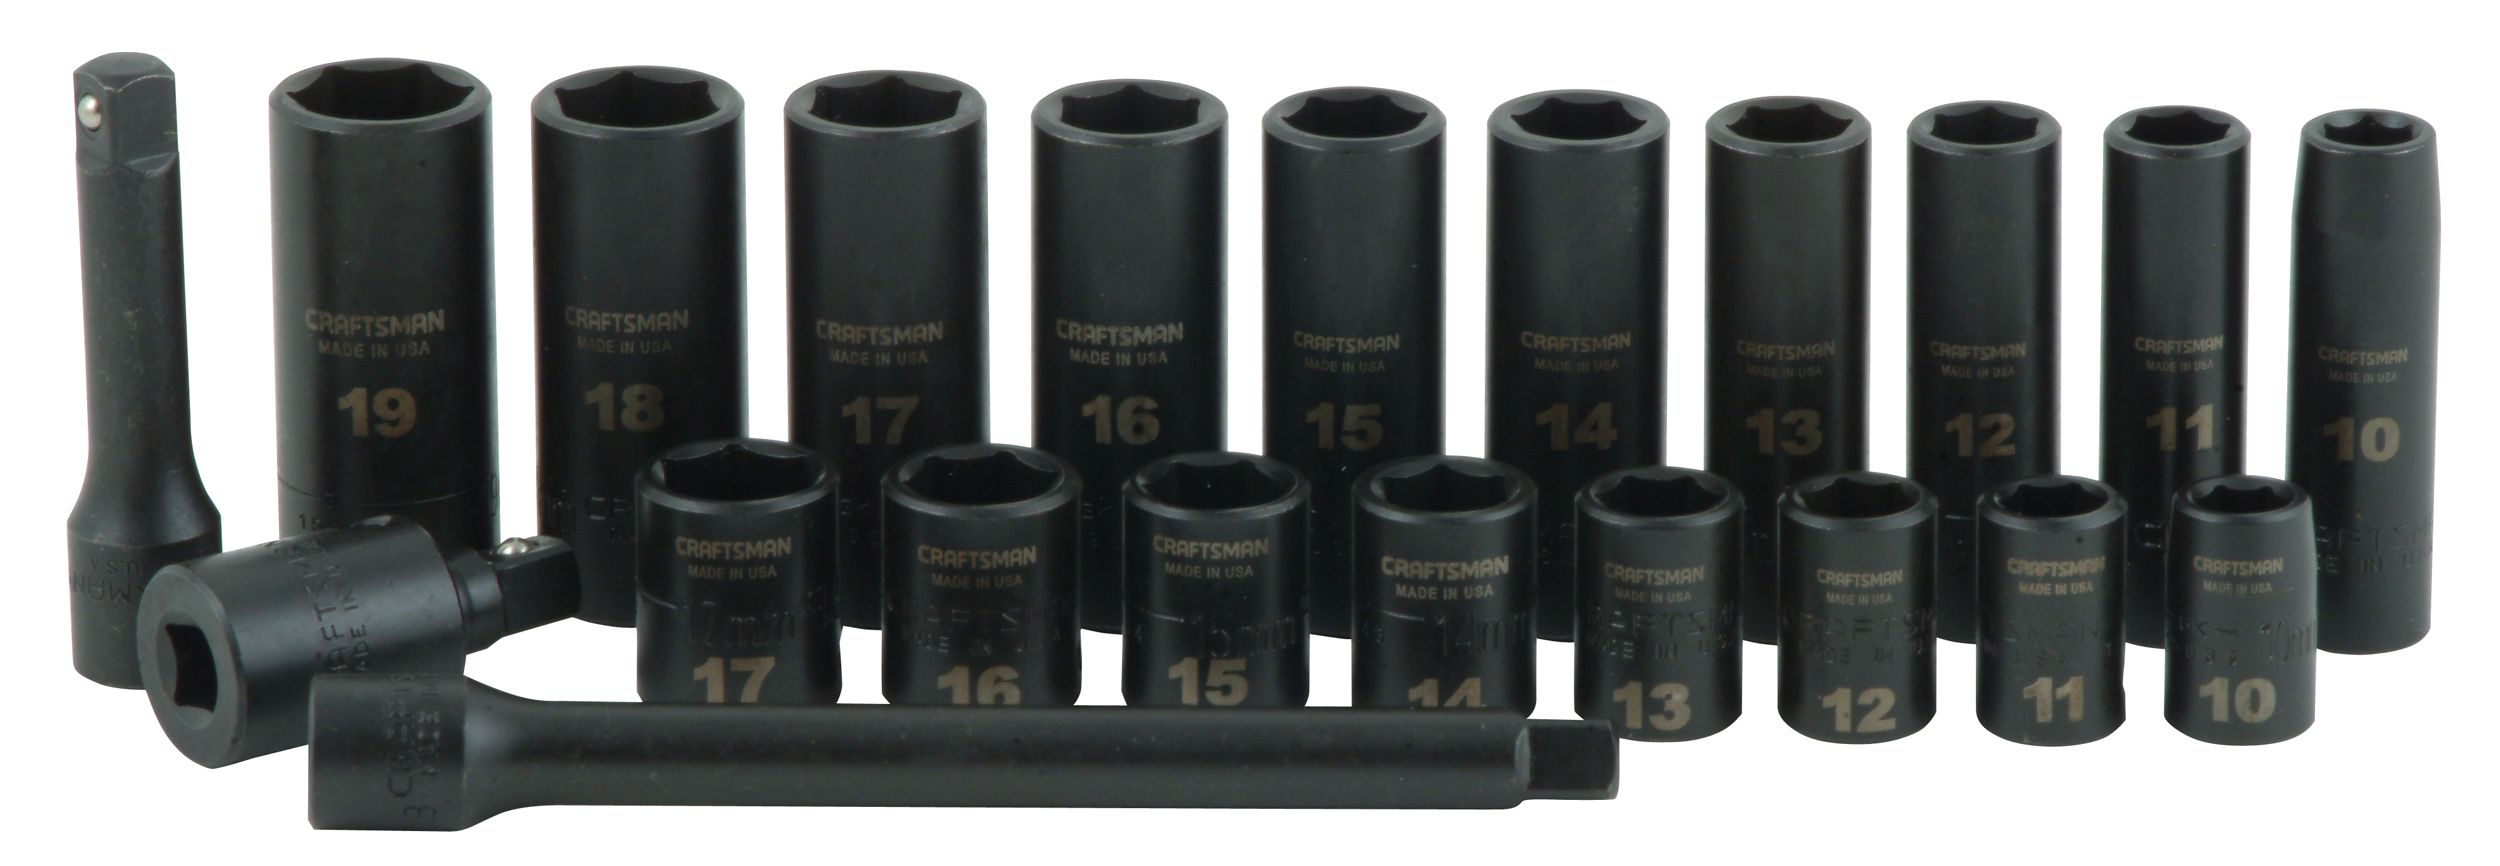 Craftsman 21 pc. Easy Read Impact Socket Set, 6 pt. Std. and Deep, 3/8 in. Dr.